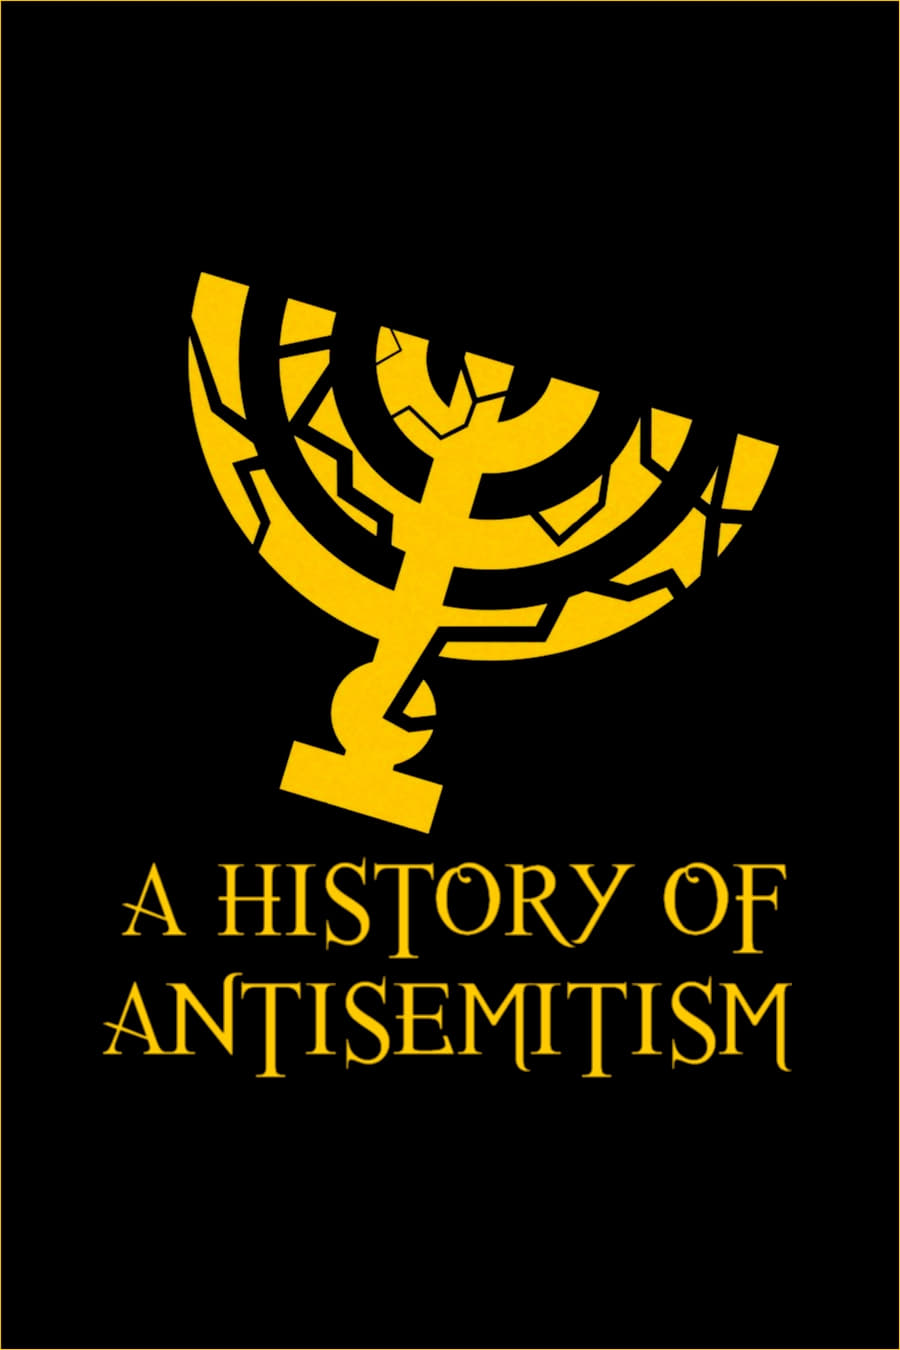 A History of Antisemitism